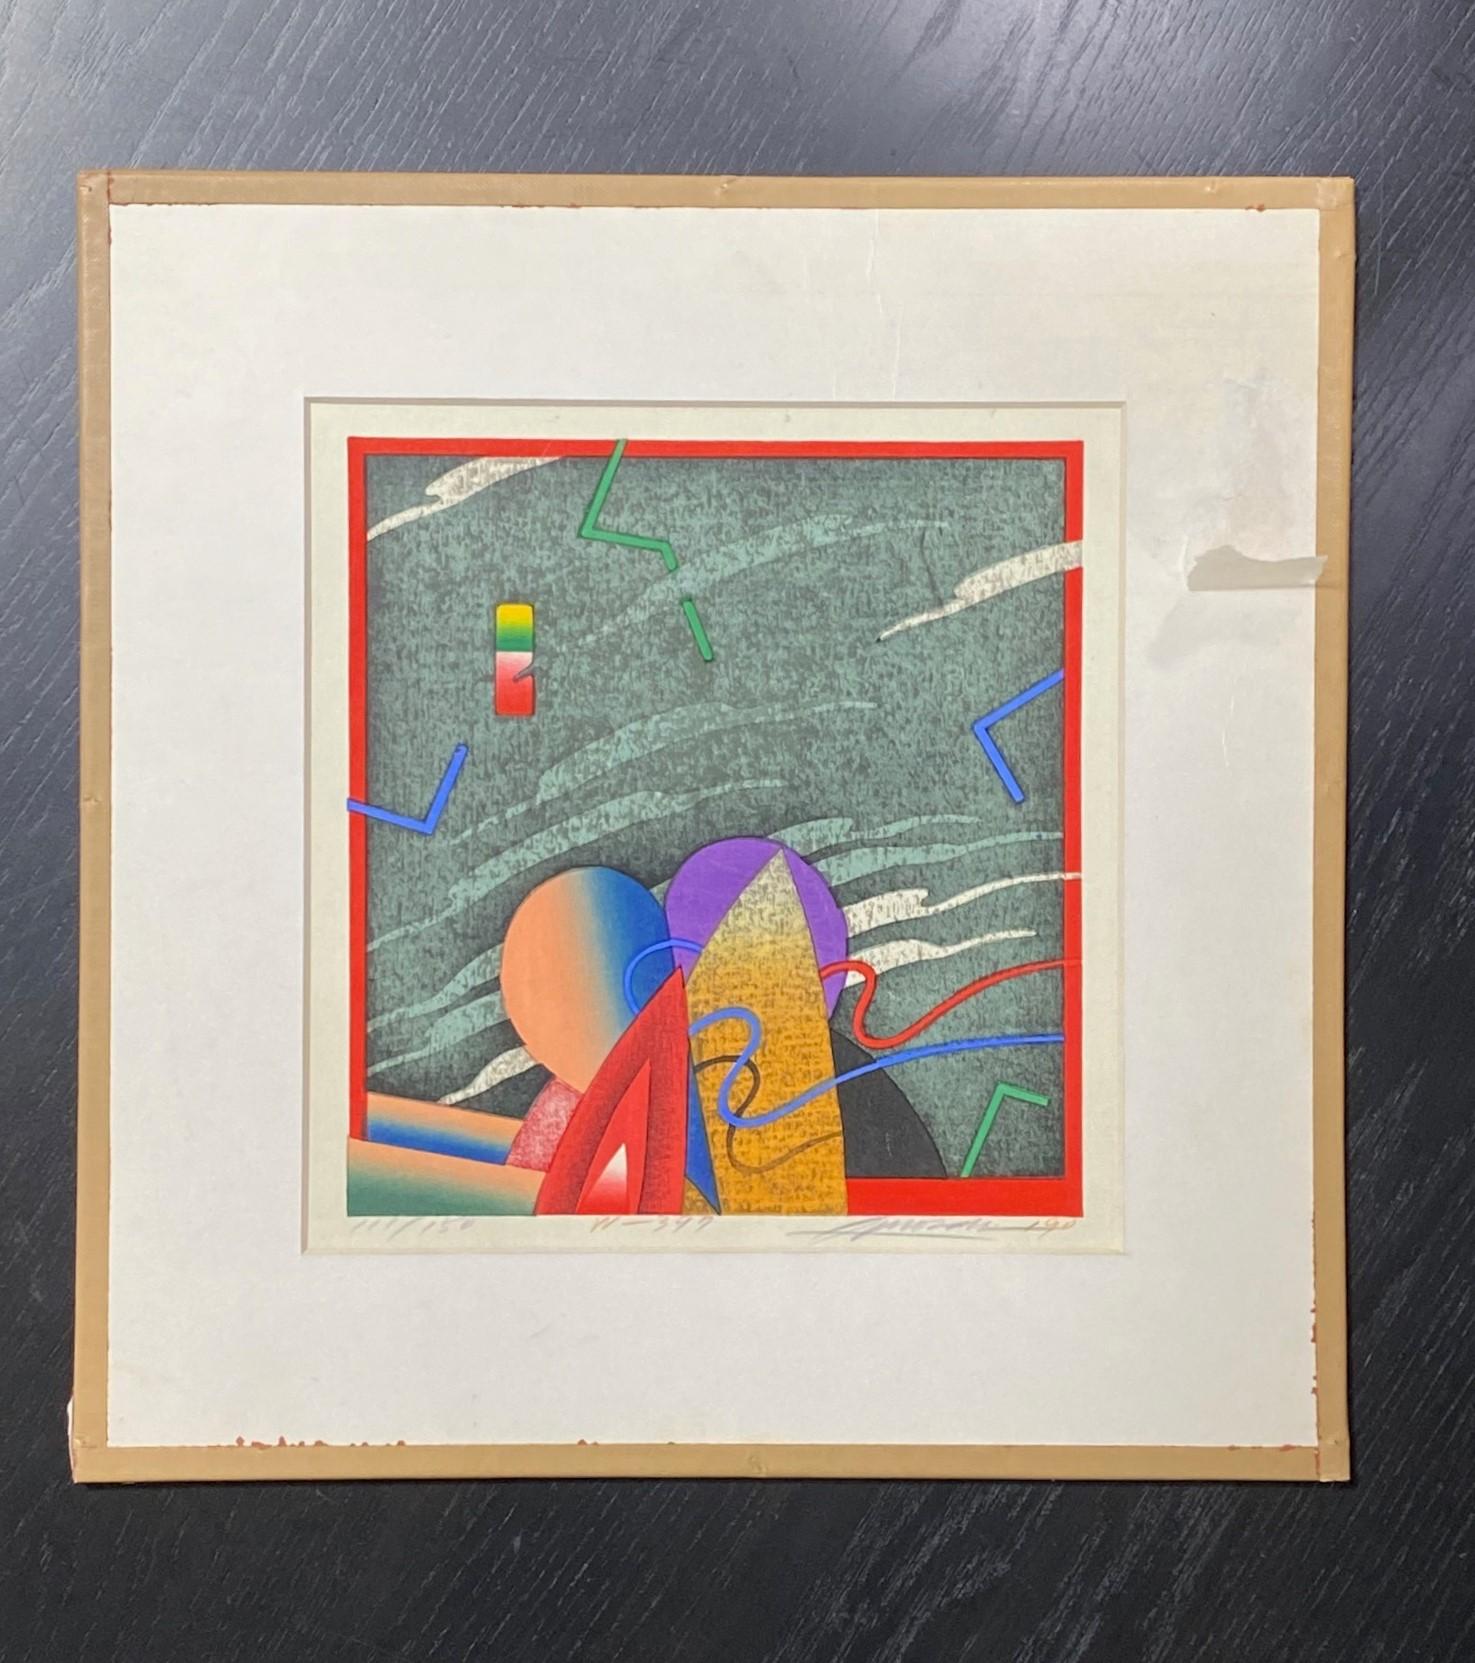 A wonderfully composed and richly colored abstract woodblock print by Japanese artist Akira Kurosaki ((黒崎彰).

The print is hand pencil signed, titled (W-397 and sometimes referred to as 